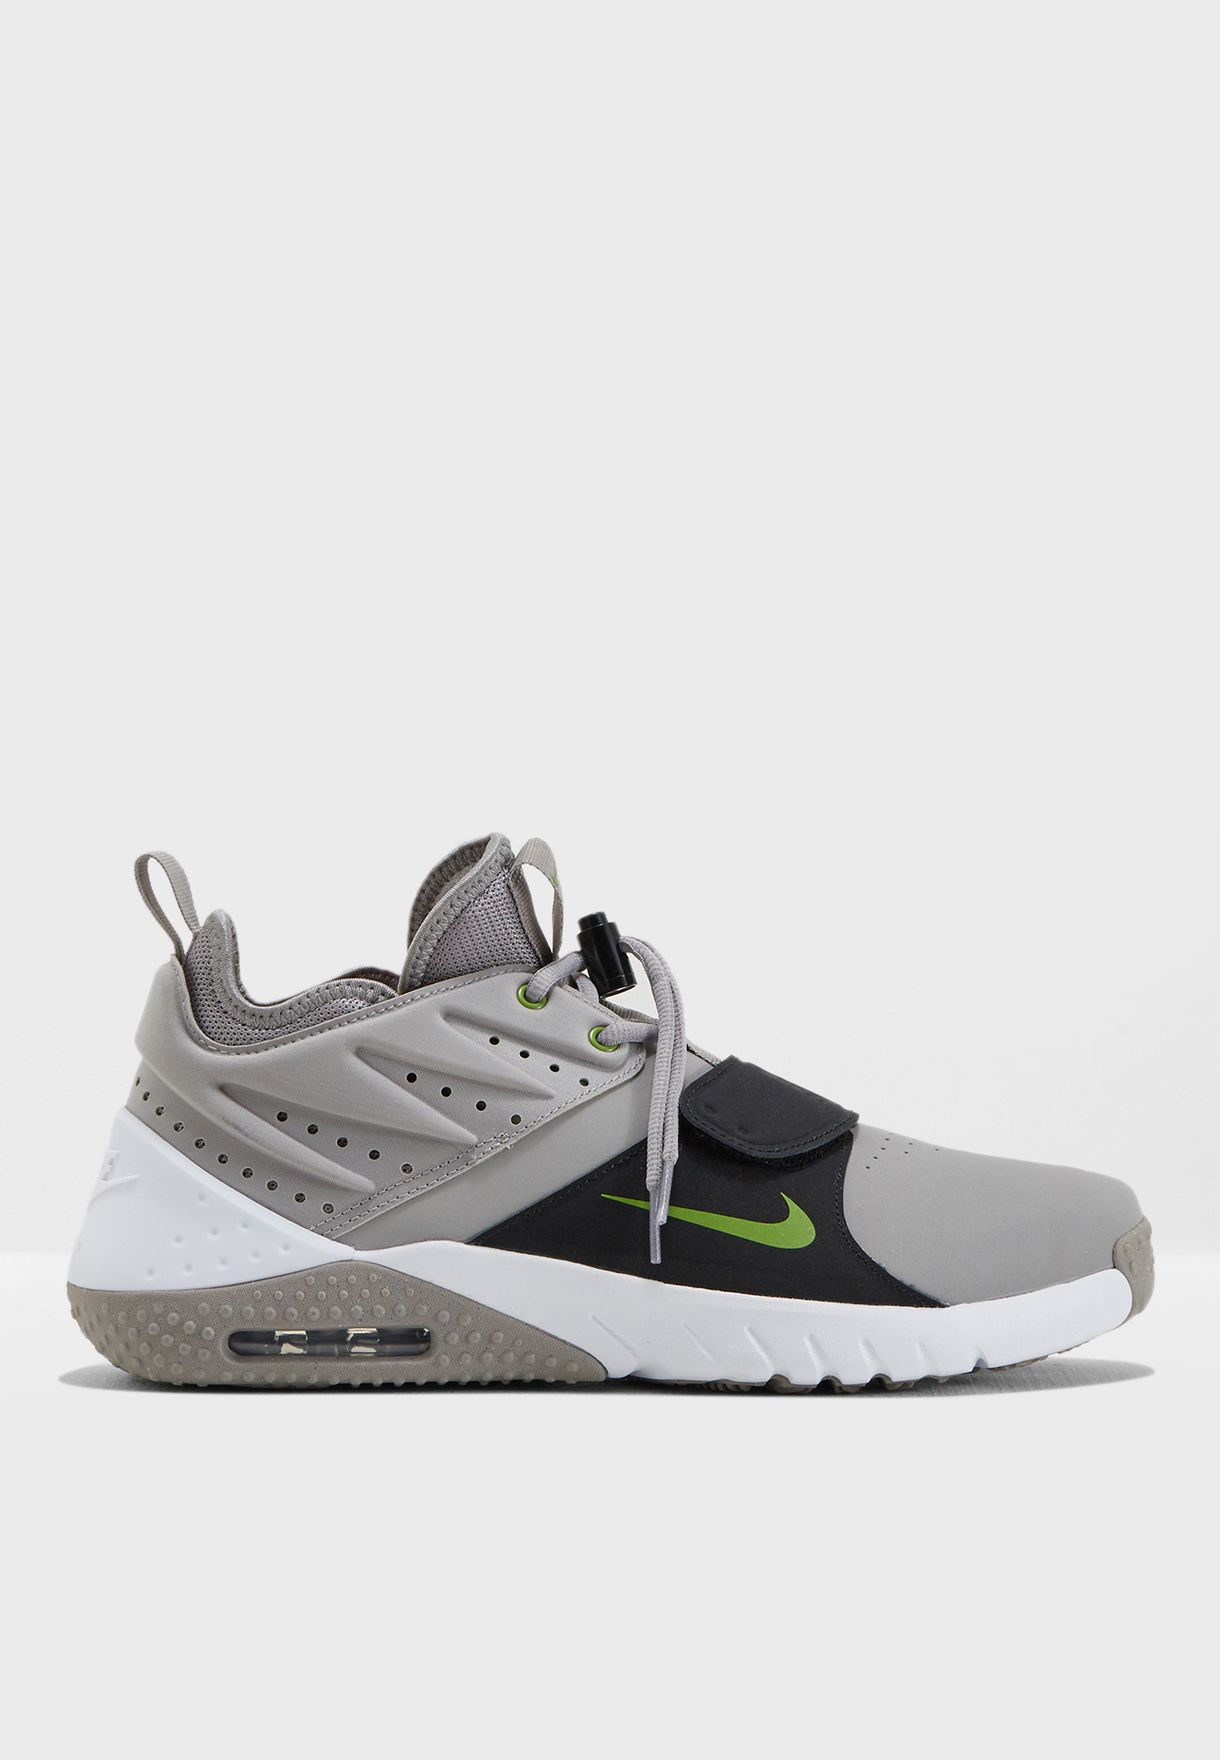 nike air max trainer 1 leather mens training shoe